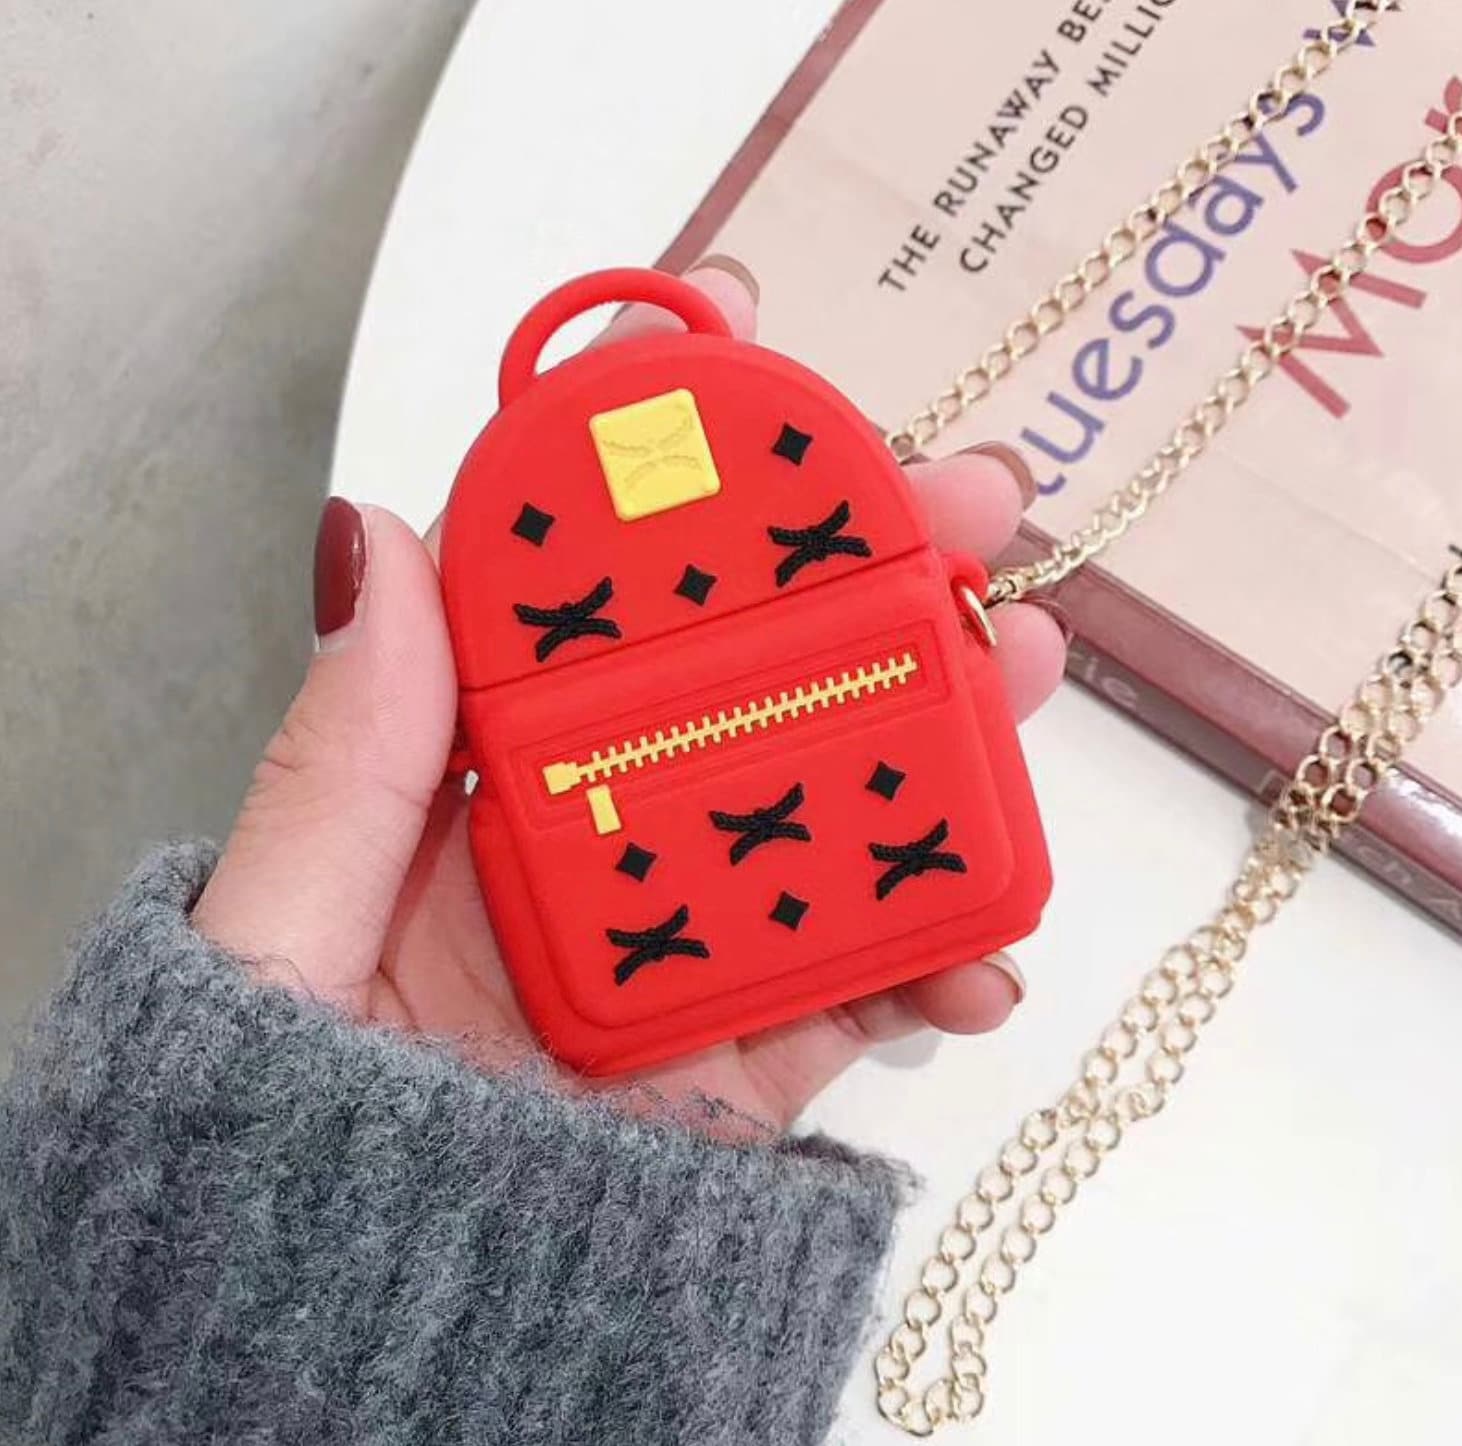 Cute Backpack with Chain Themed AirPod Generation 1, 2 , and Pro Cases